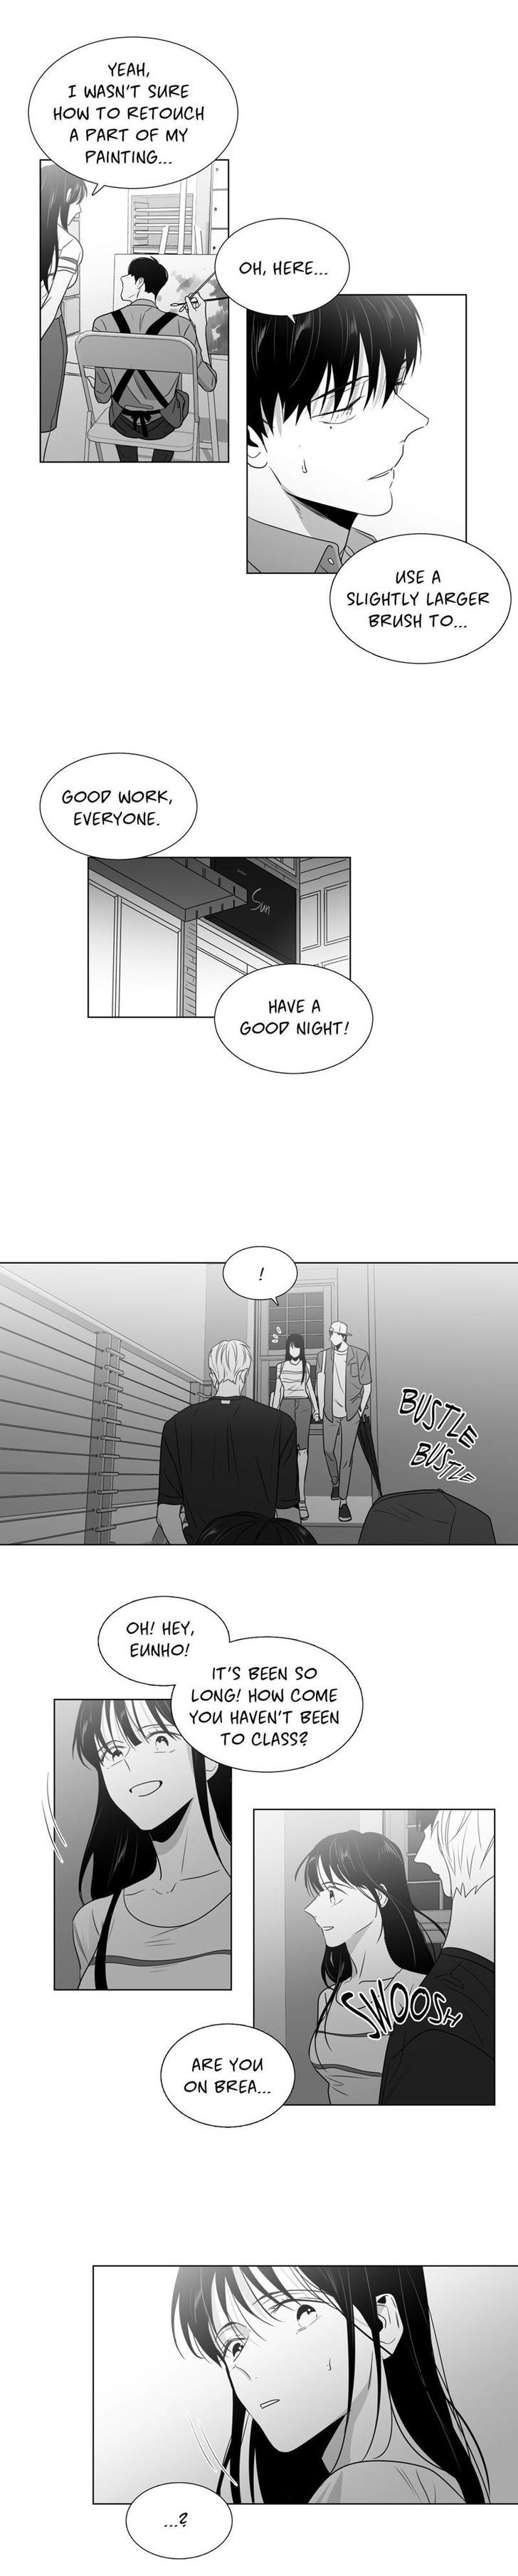 Lover Boy (Lezhin) Chapter 045 page 11